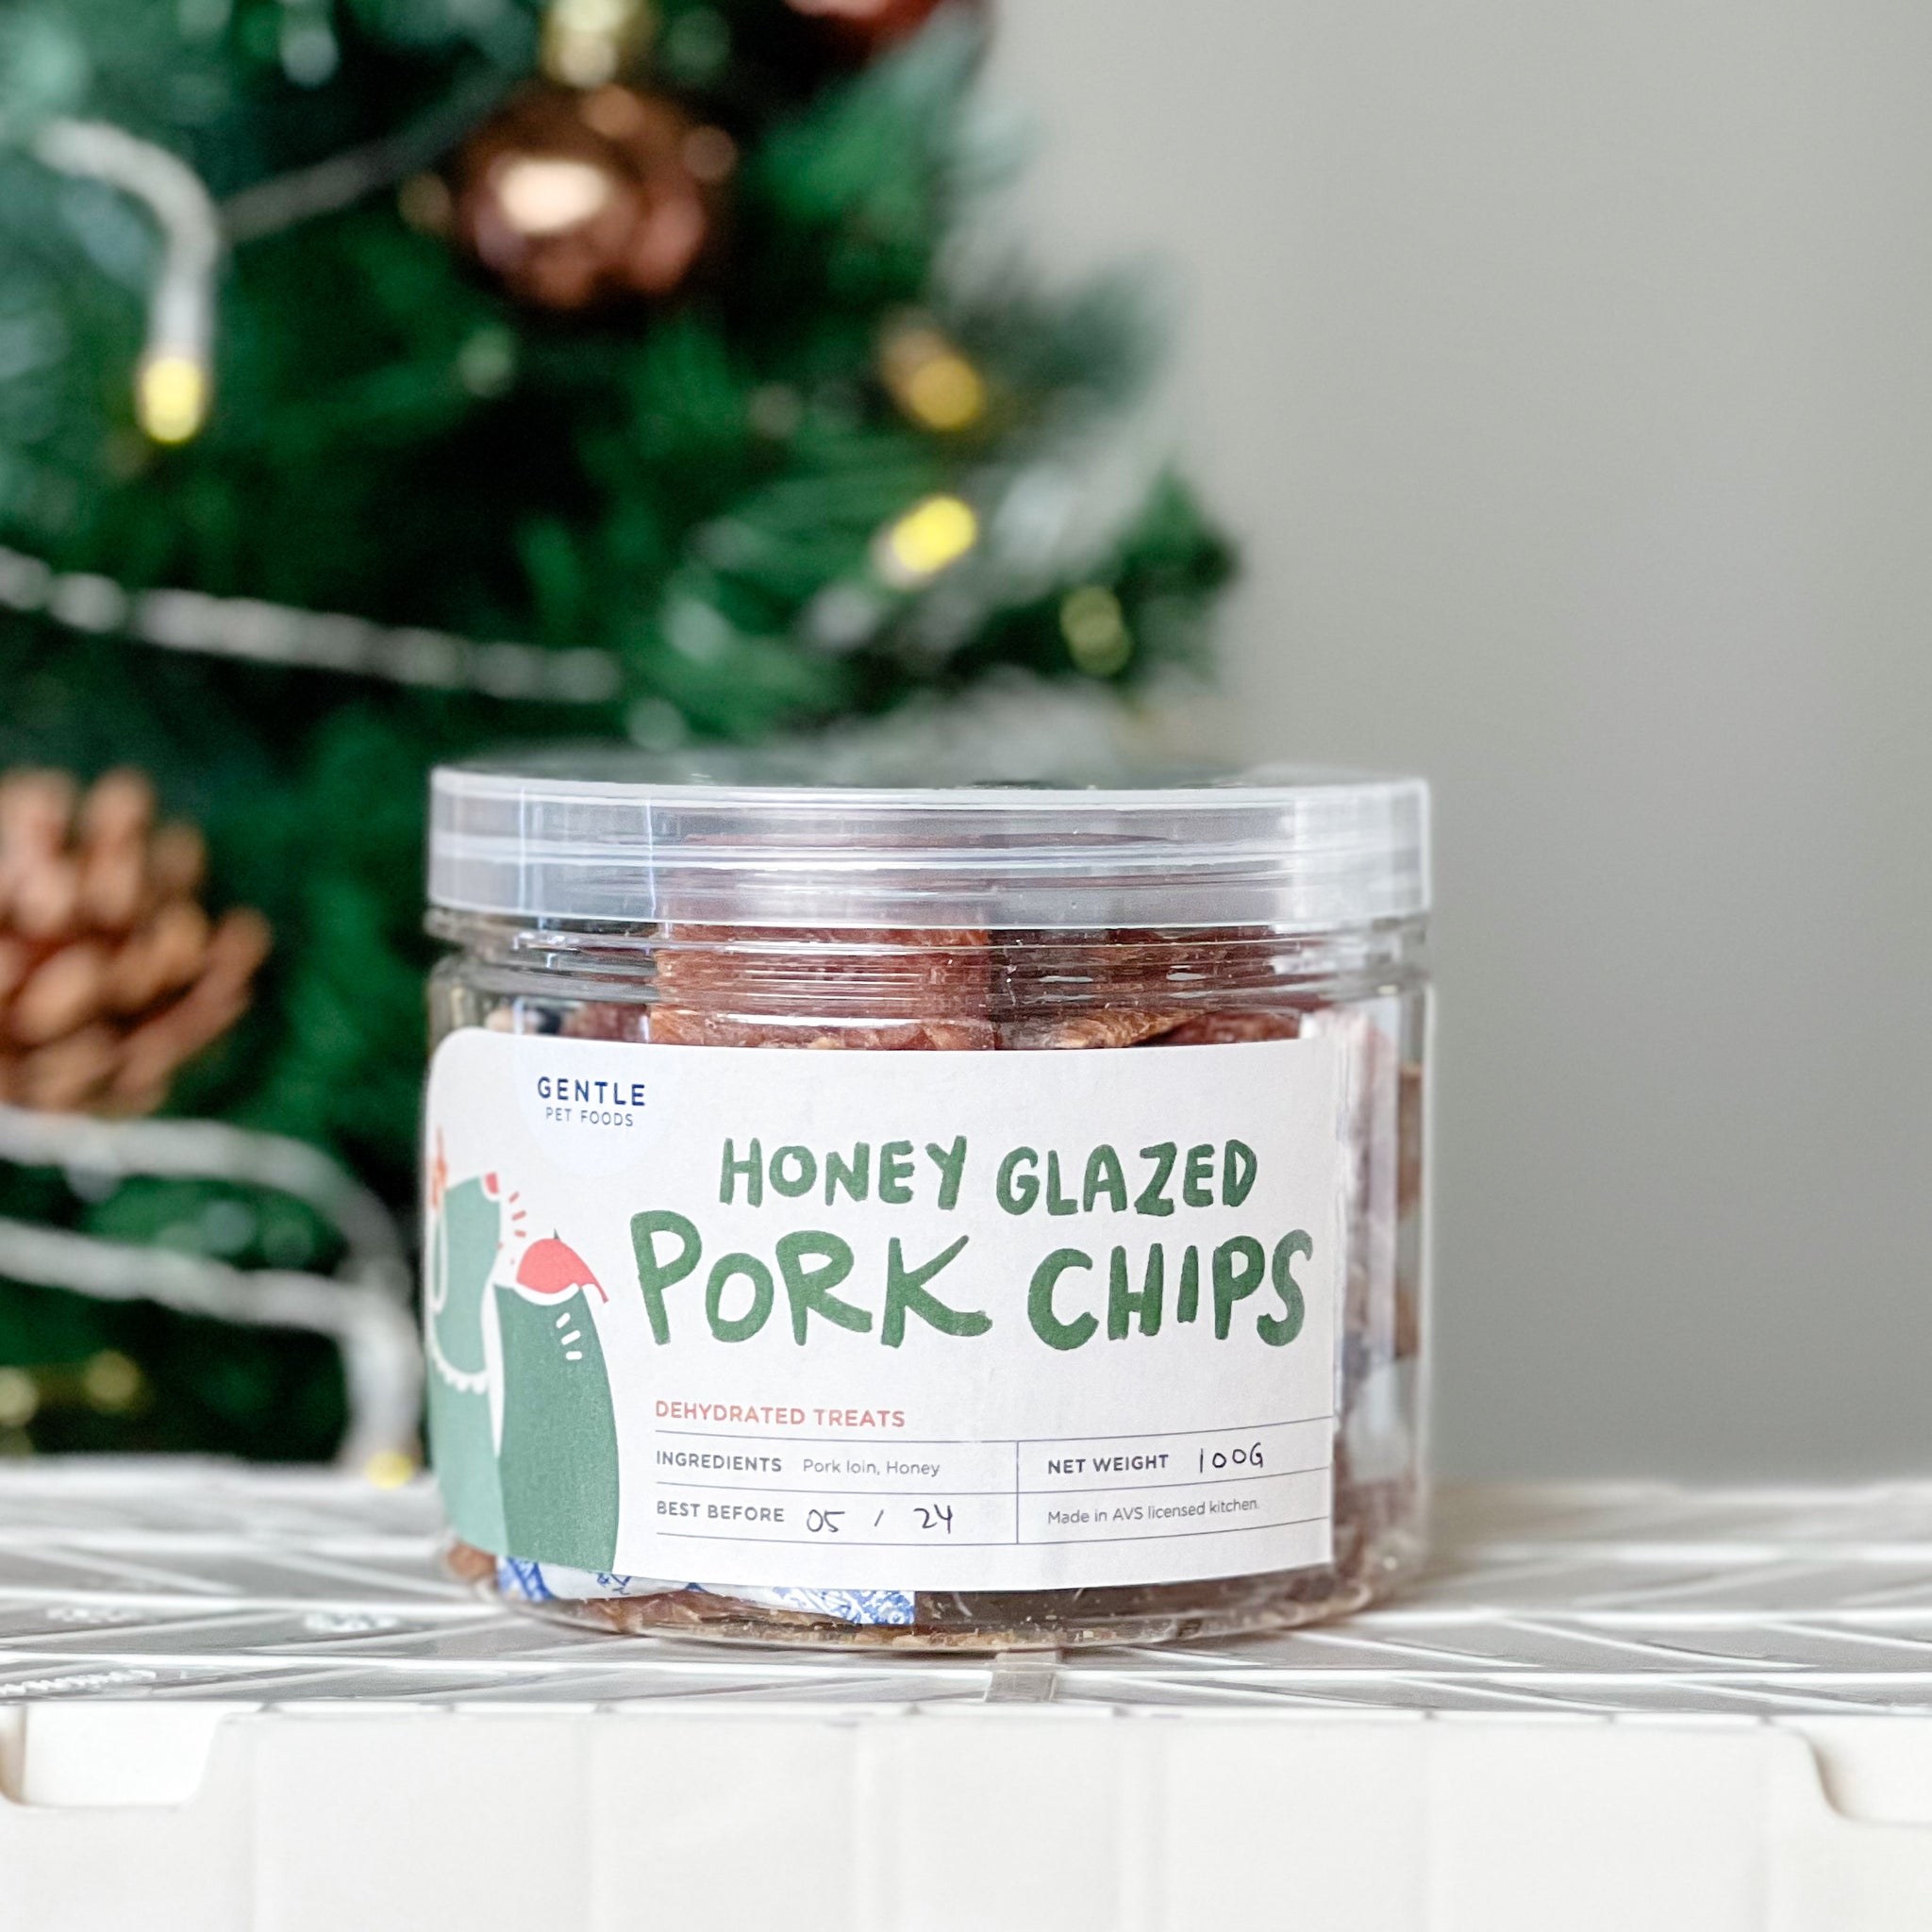 Gentle Pet Foods Christmas Special - Dehydrated Honey Glazed Pork Chips